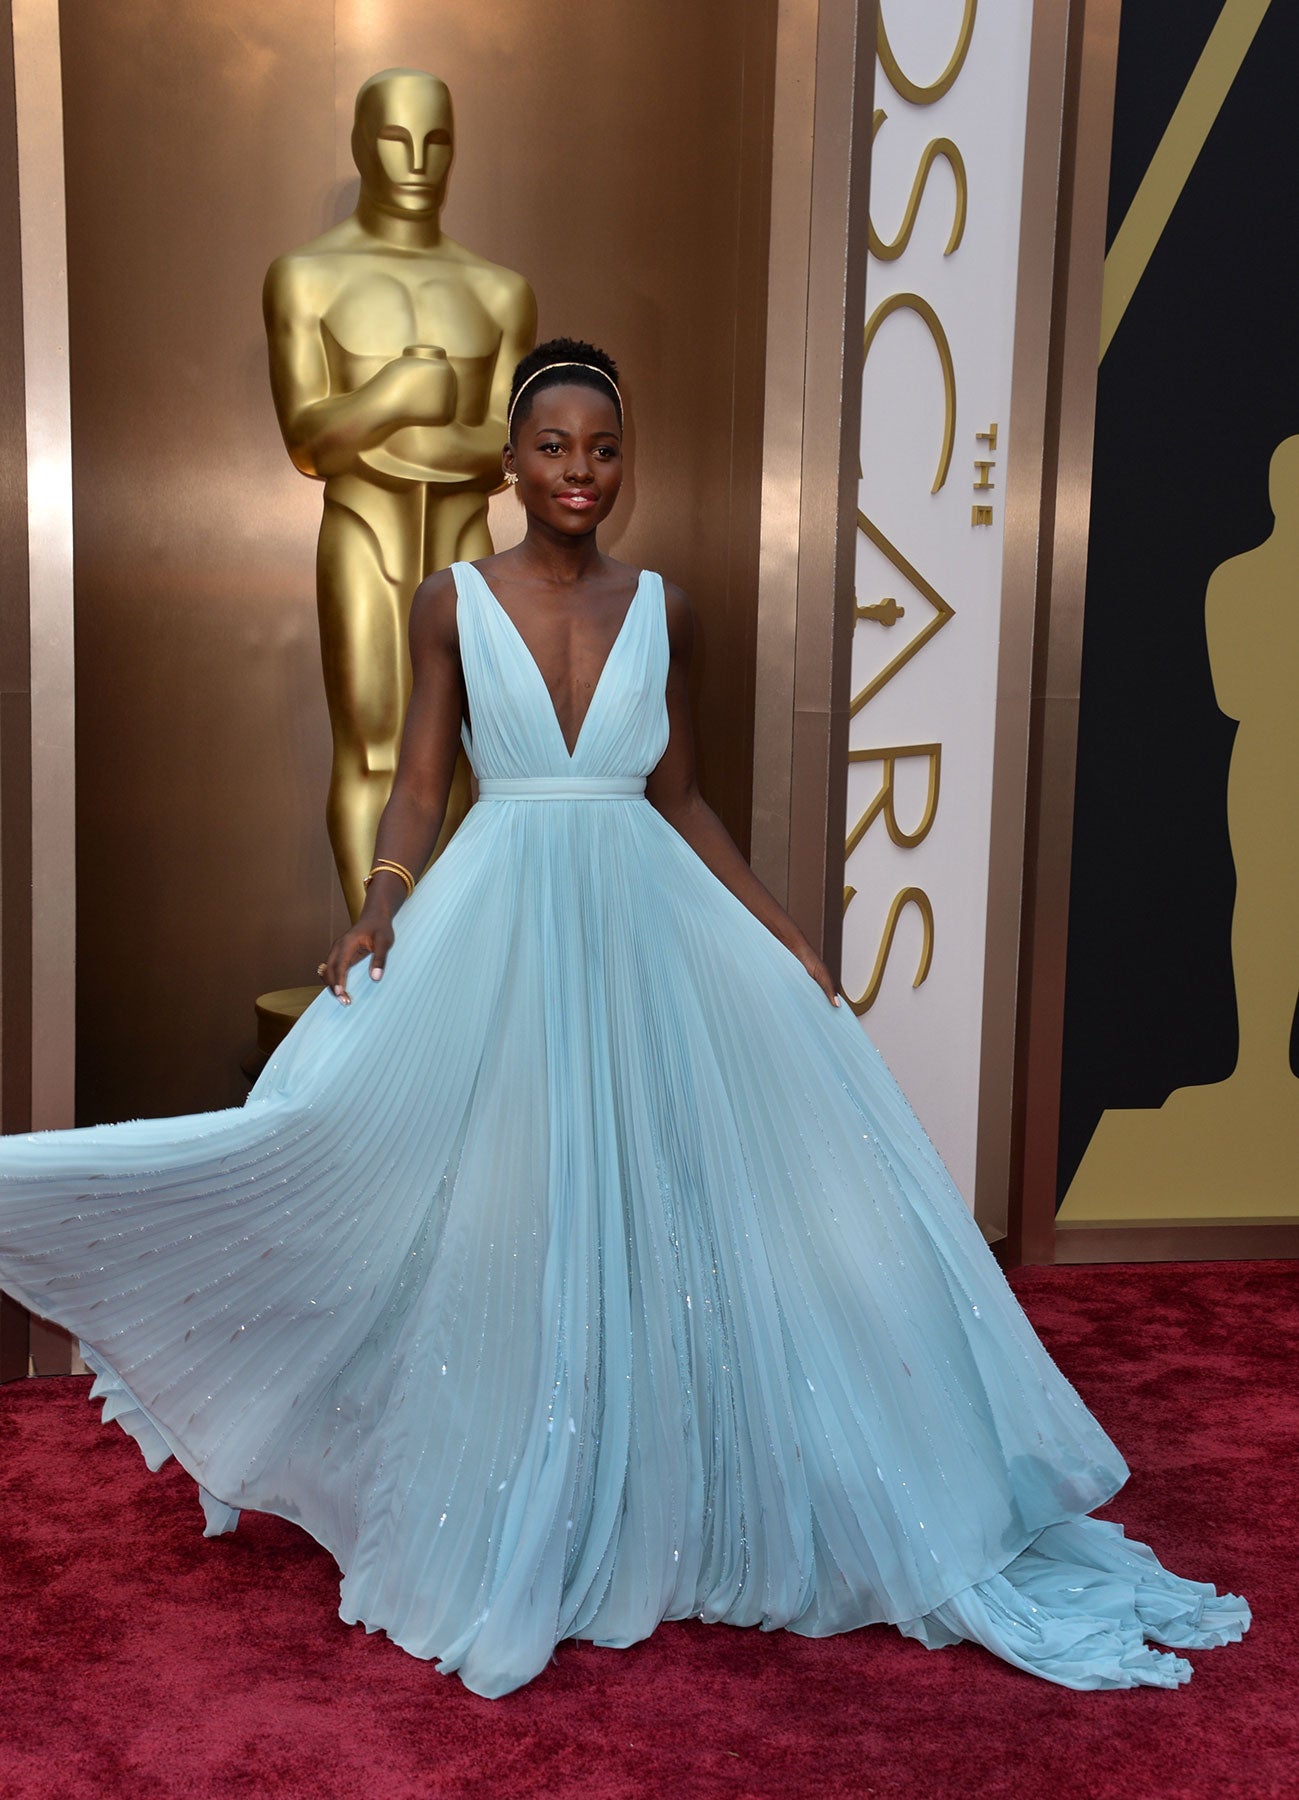 What Lupita Nyong'o's Oscar Win Means to Me
